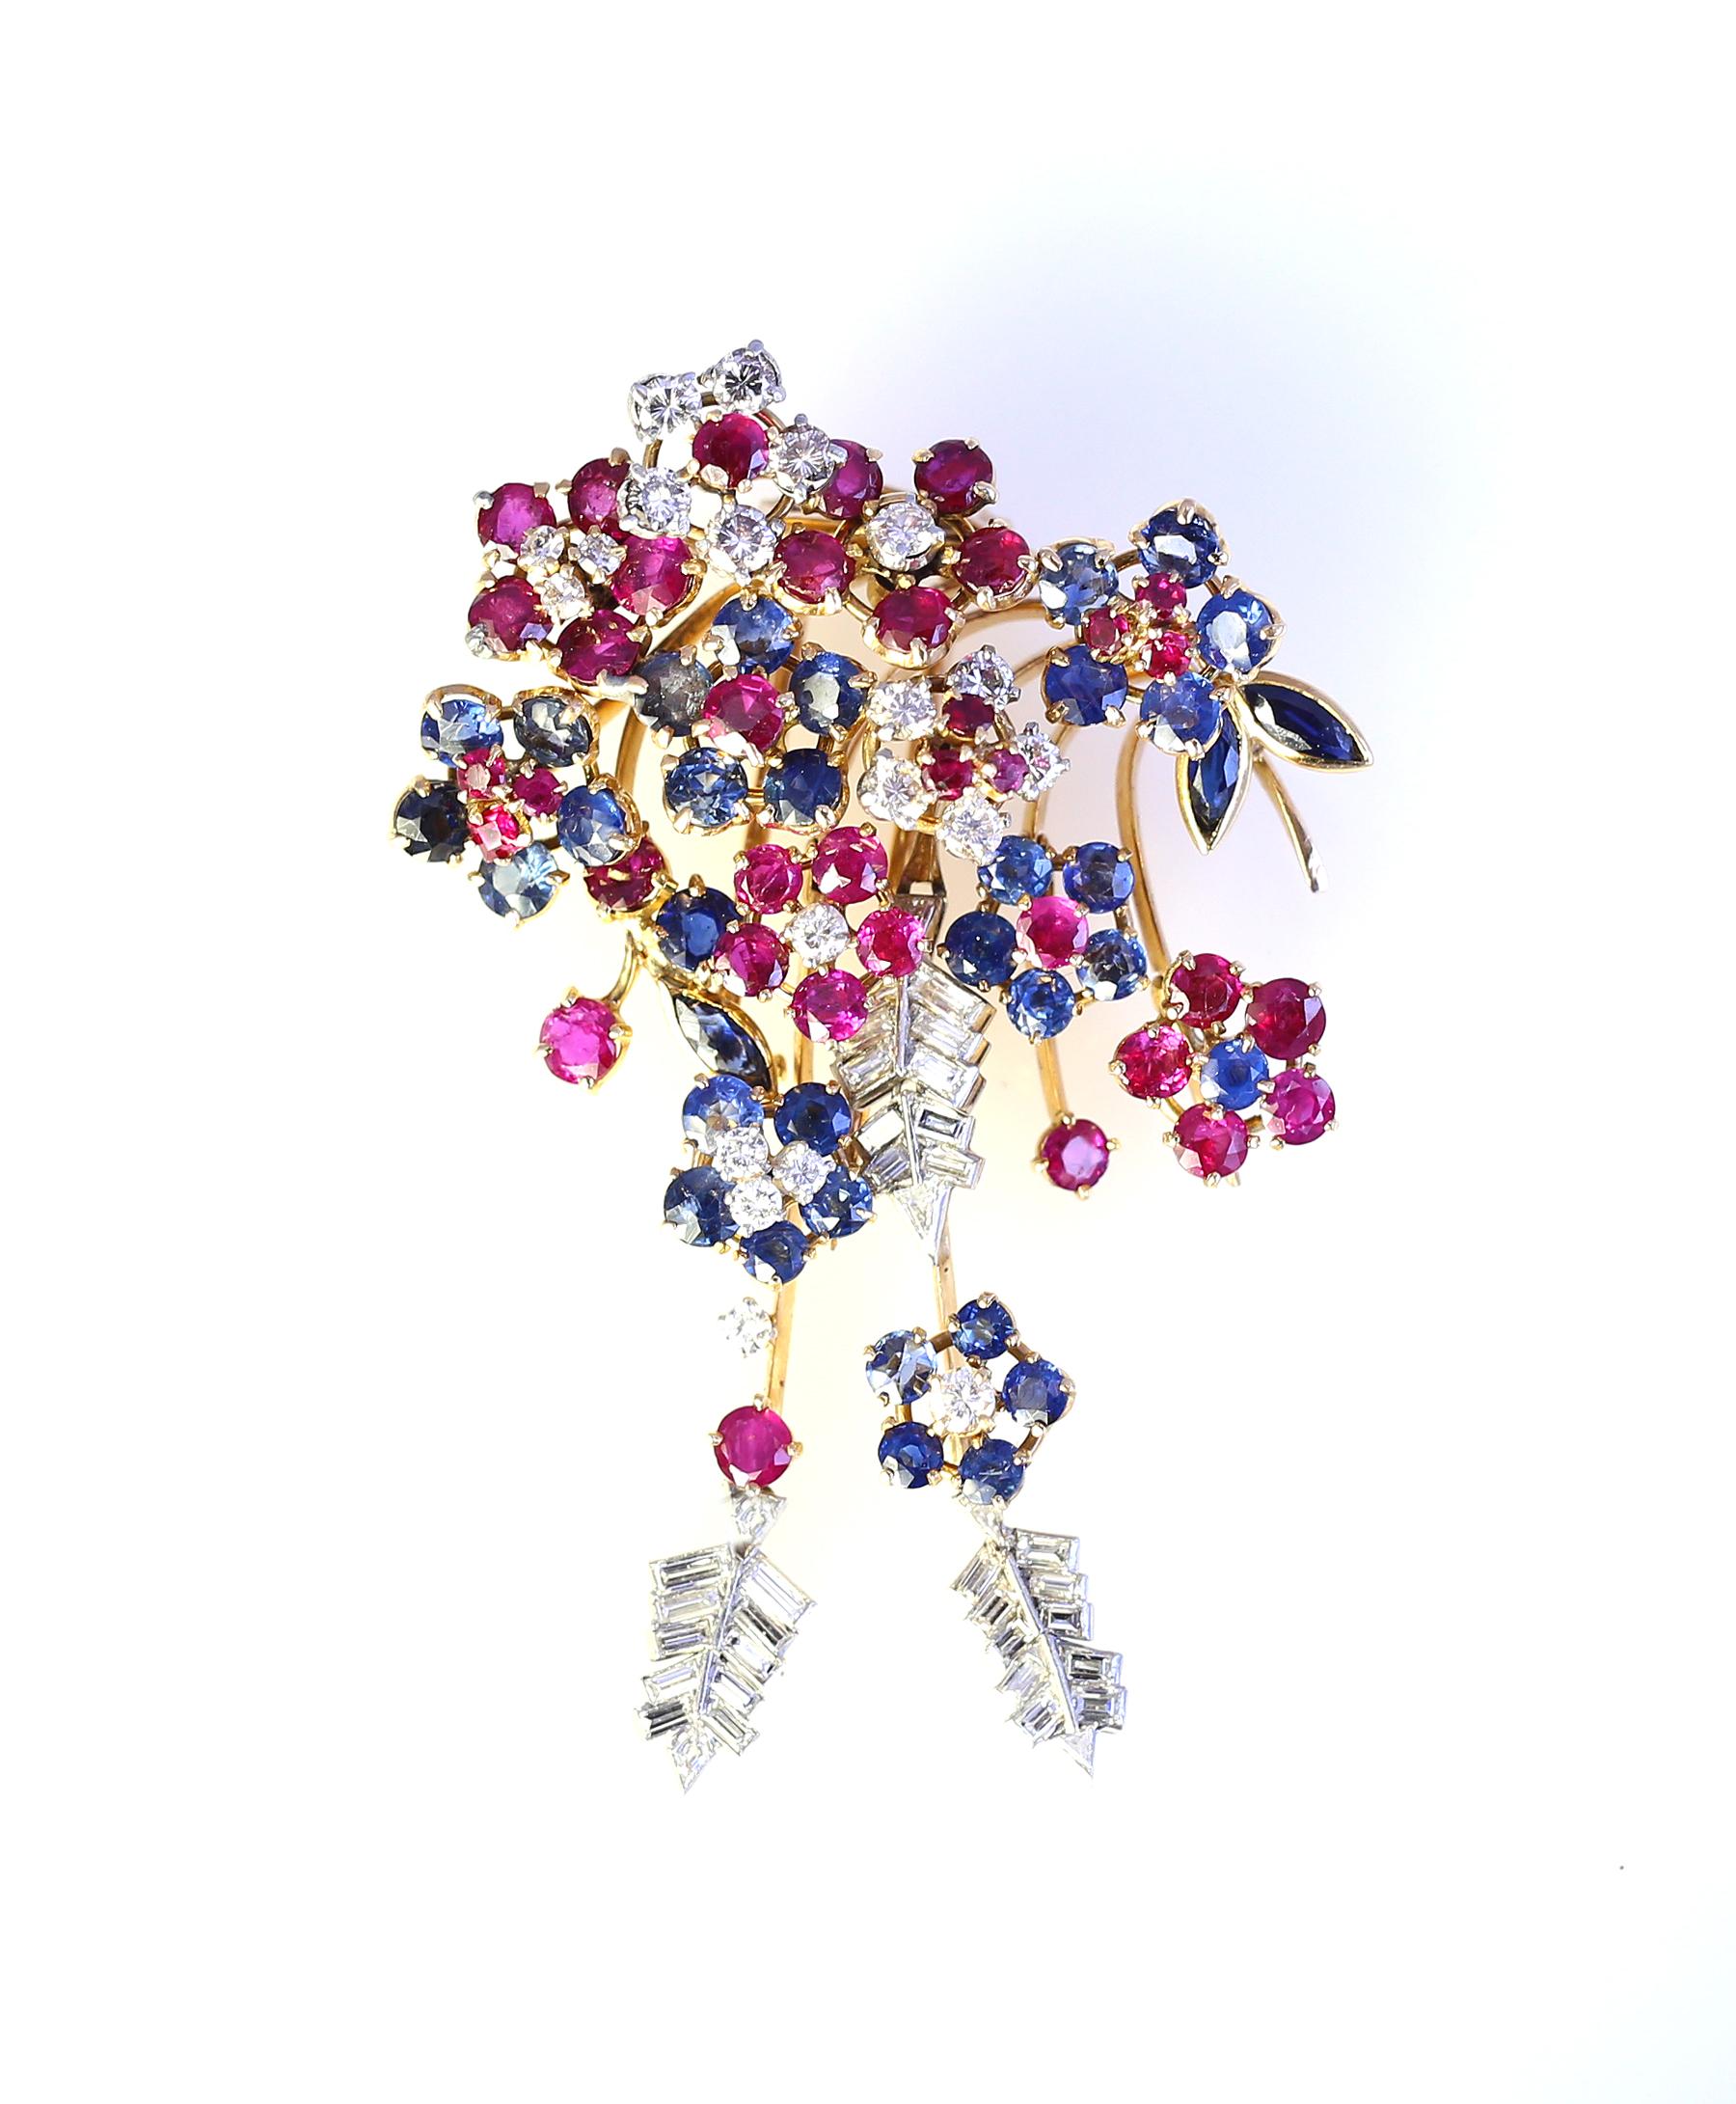 Vintage Platinum and yellow Gold flower bouquet brooch set with Diamonds Sapphires and Rubies. 1950 was a time of rehabilitation in Europe after the great war. Designers were trying to put some colours to the new emerging world. 
Masterfully made